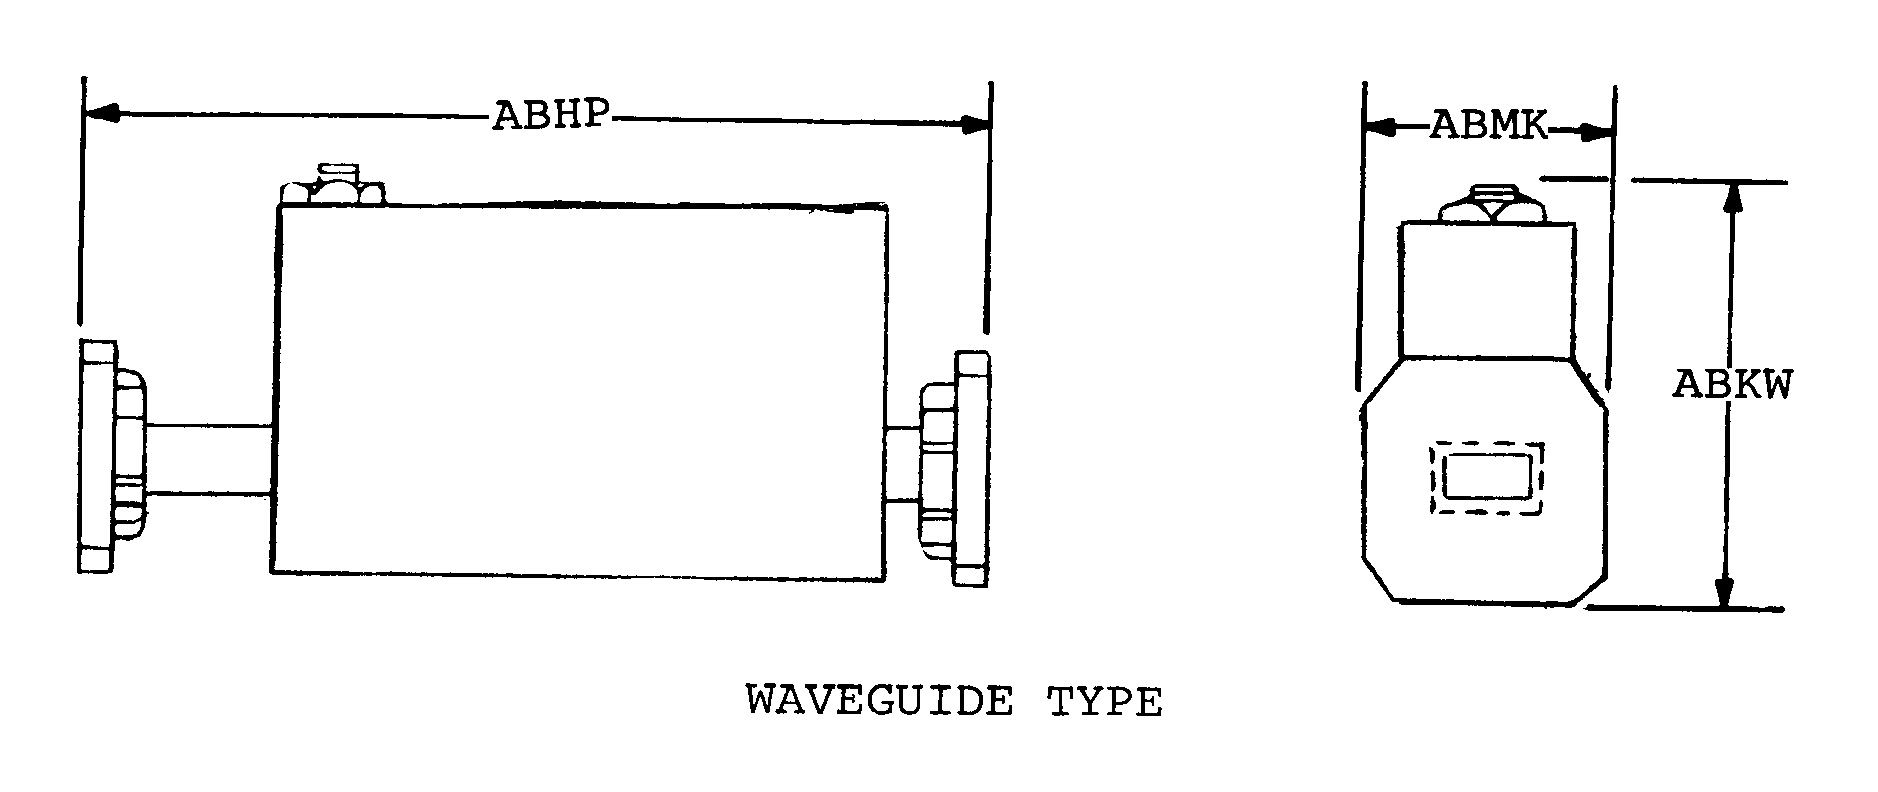 WAVEGUIDE TYPE style nsn 5985-01-054-8537